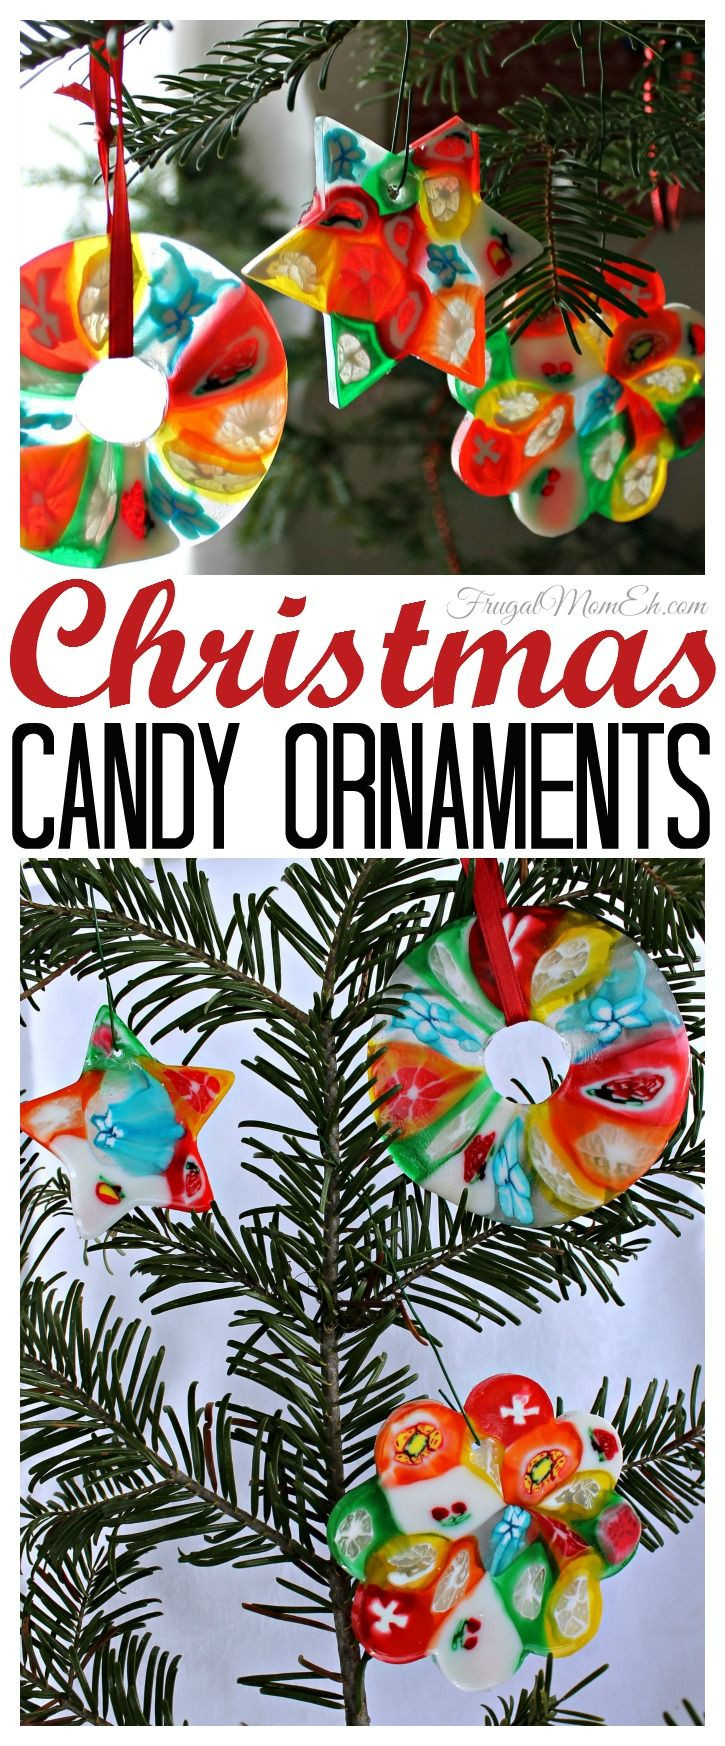 Christmas Candy Ornaments
 Christmas Candy Ornaments